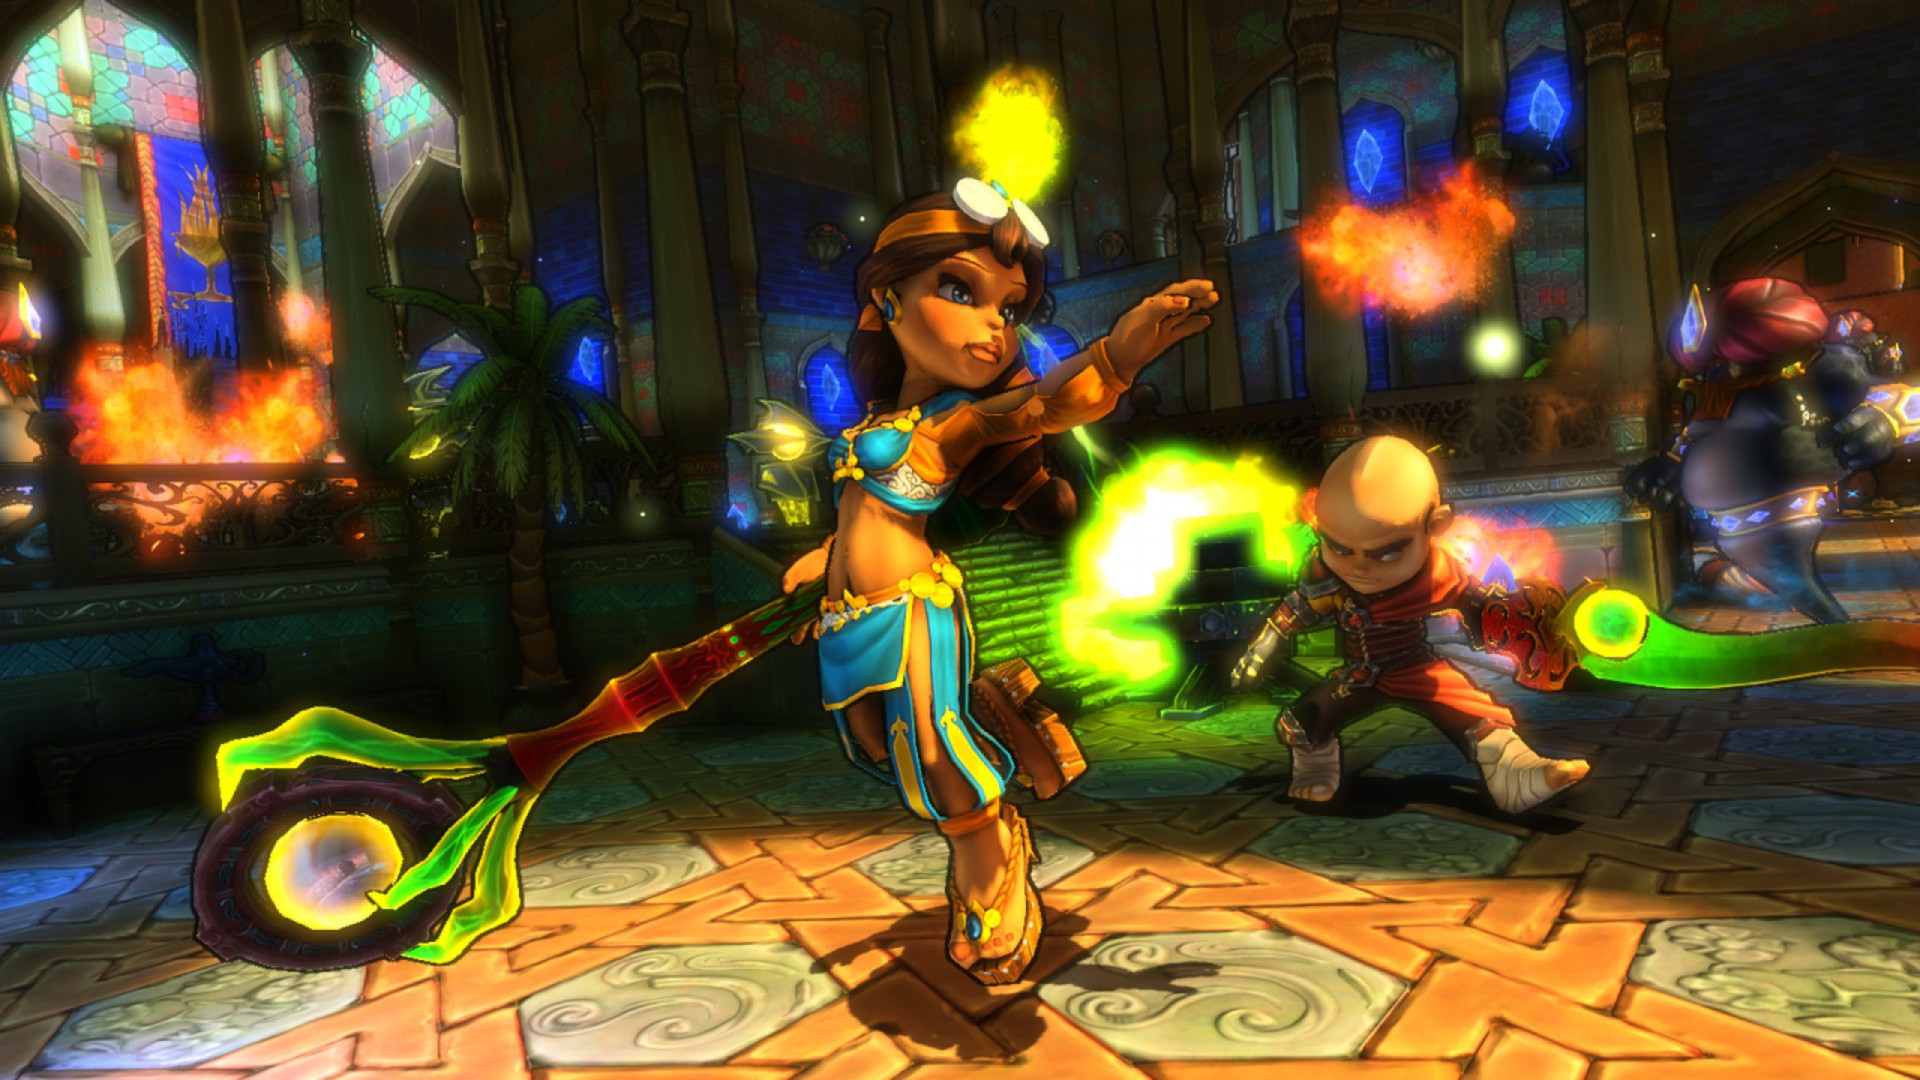 Dungeon Defenders - Quest for the Lost Eternia Shards Part 2 Featured Screenshot #1